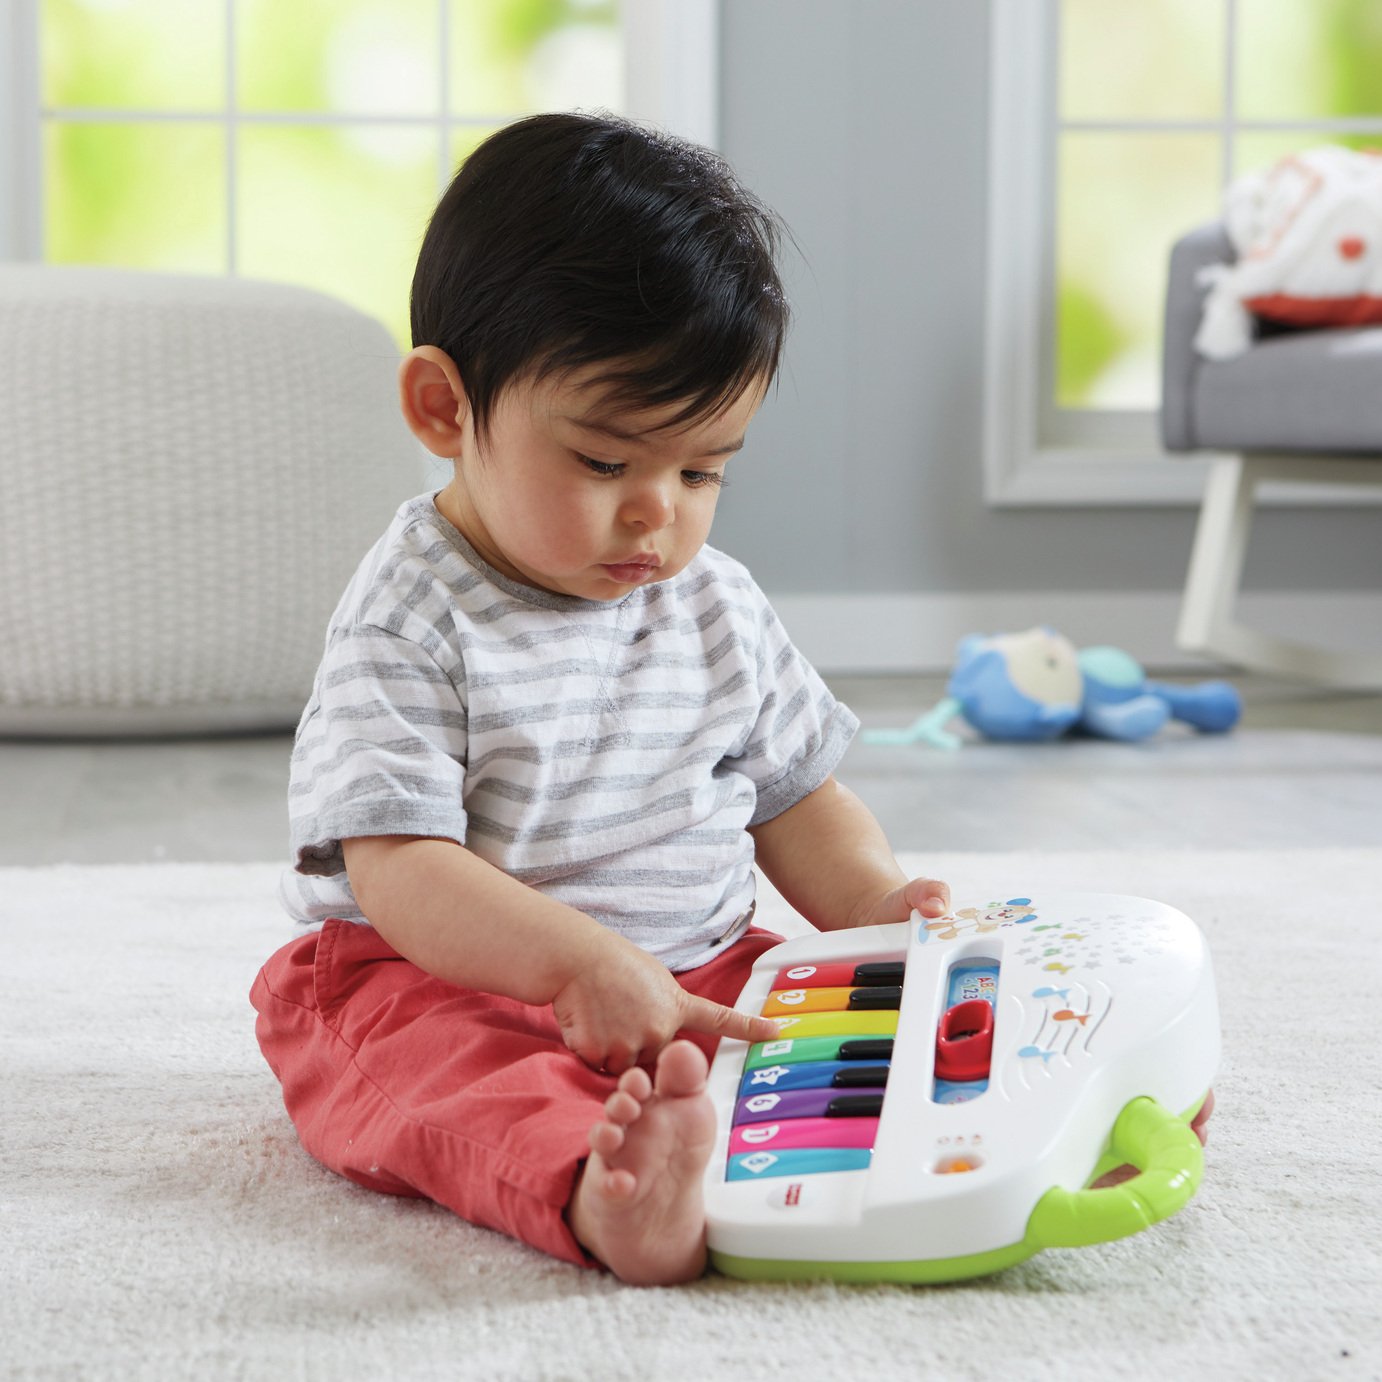 Fisher-Price Laugh & Learn Silly Sounds Light-Up Piano Toy